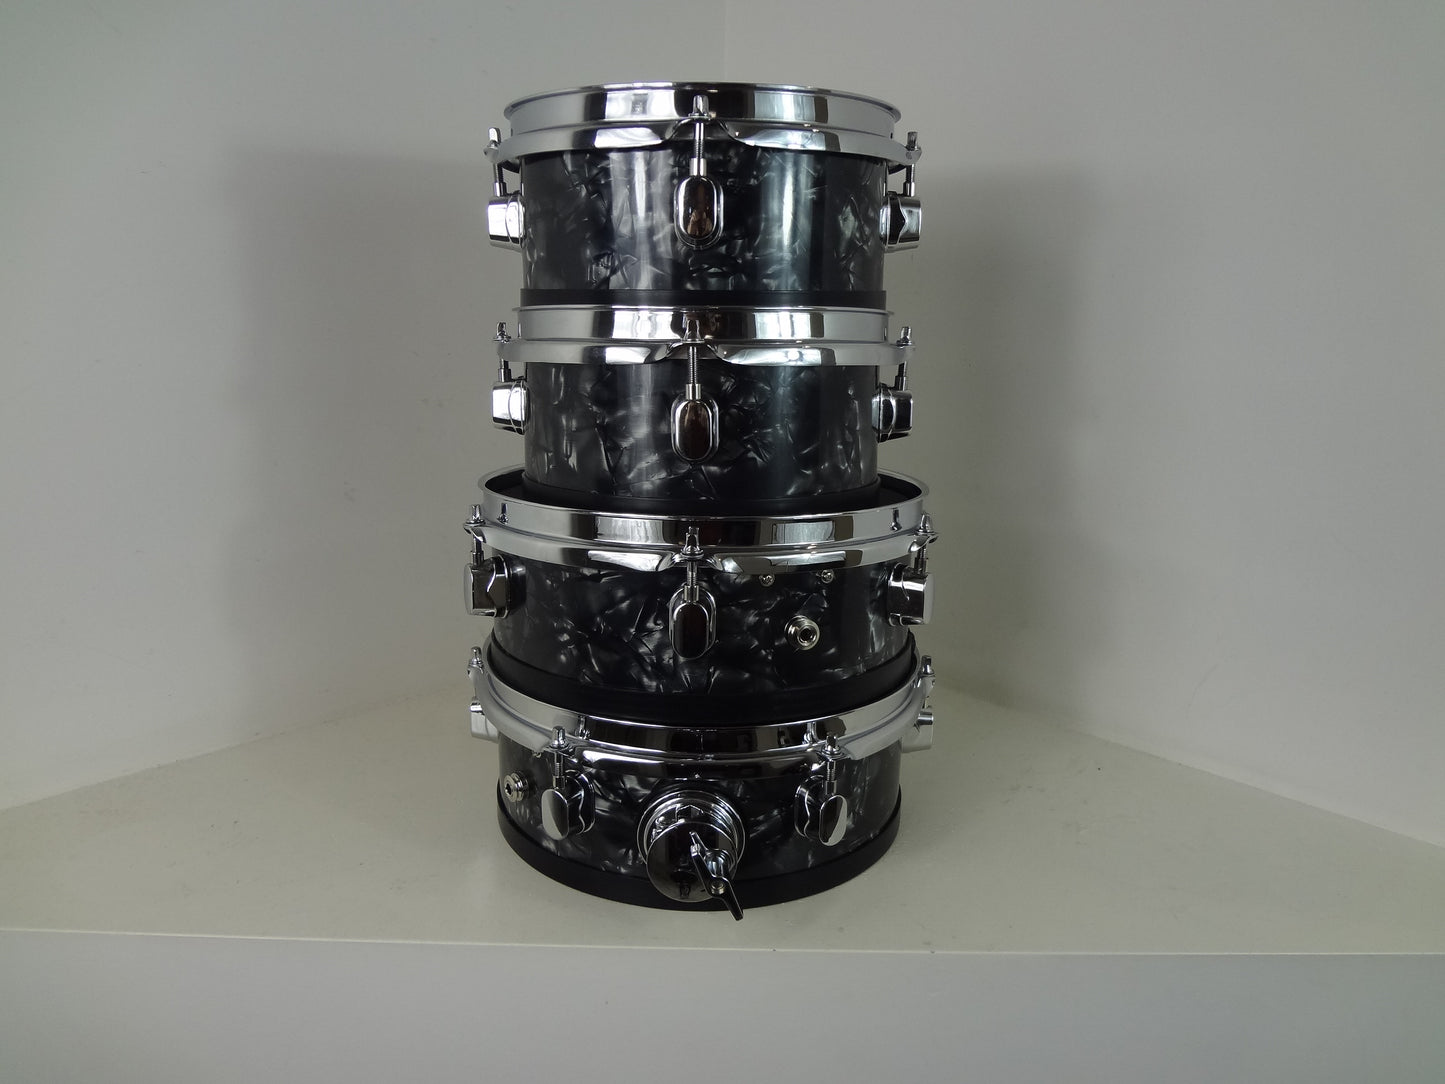 NEW 5 PIECE CUSTOM ELECTRONIC DRUM SHELL PACK - BLACK PEARL